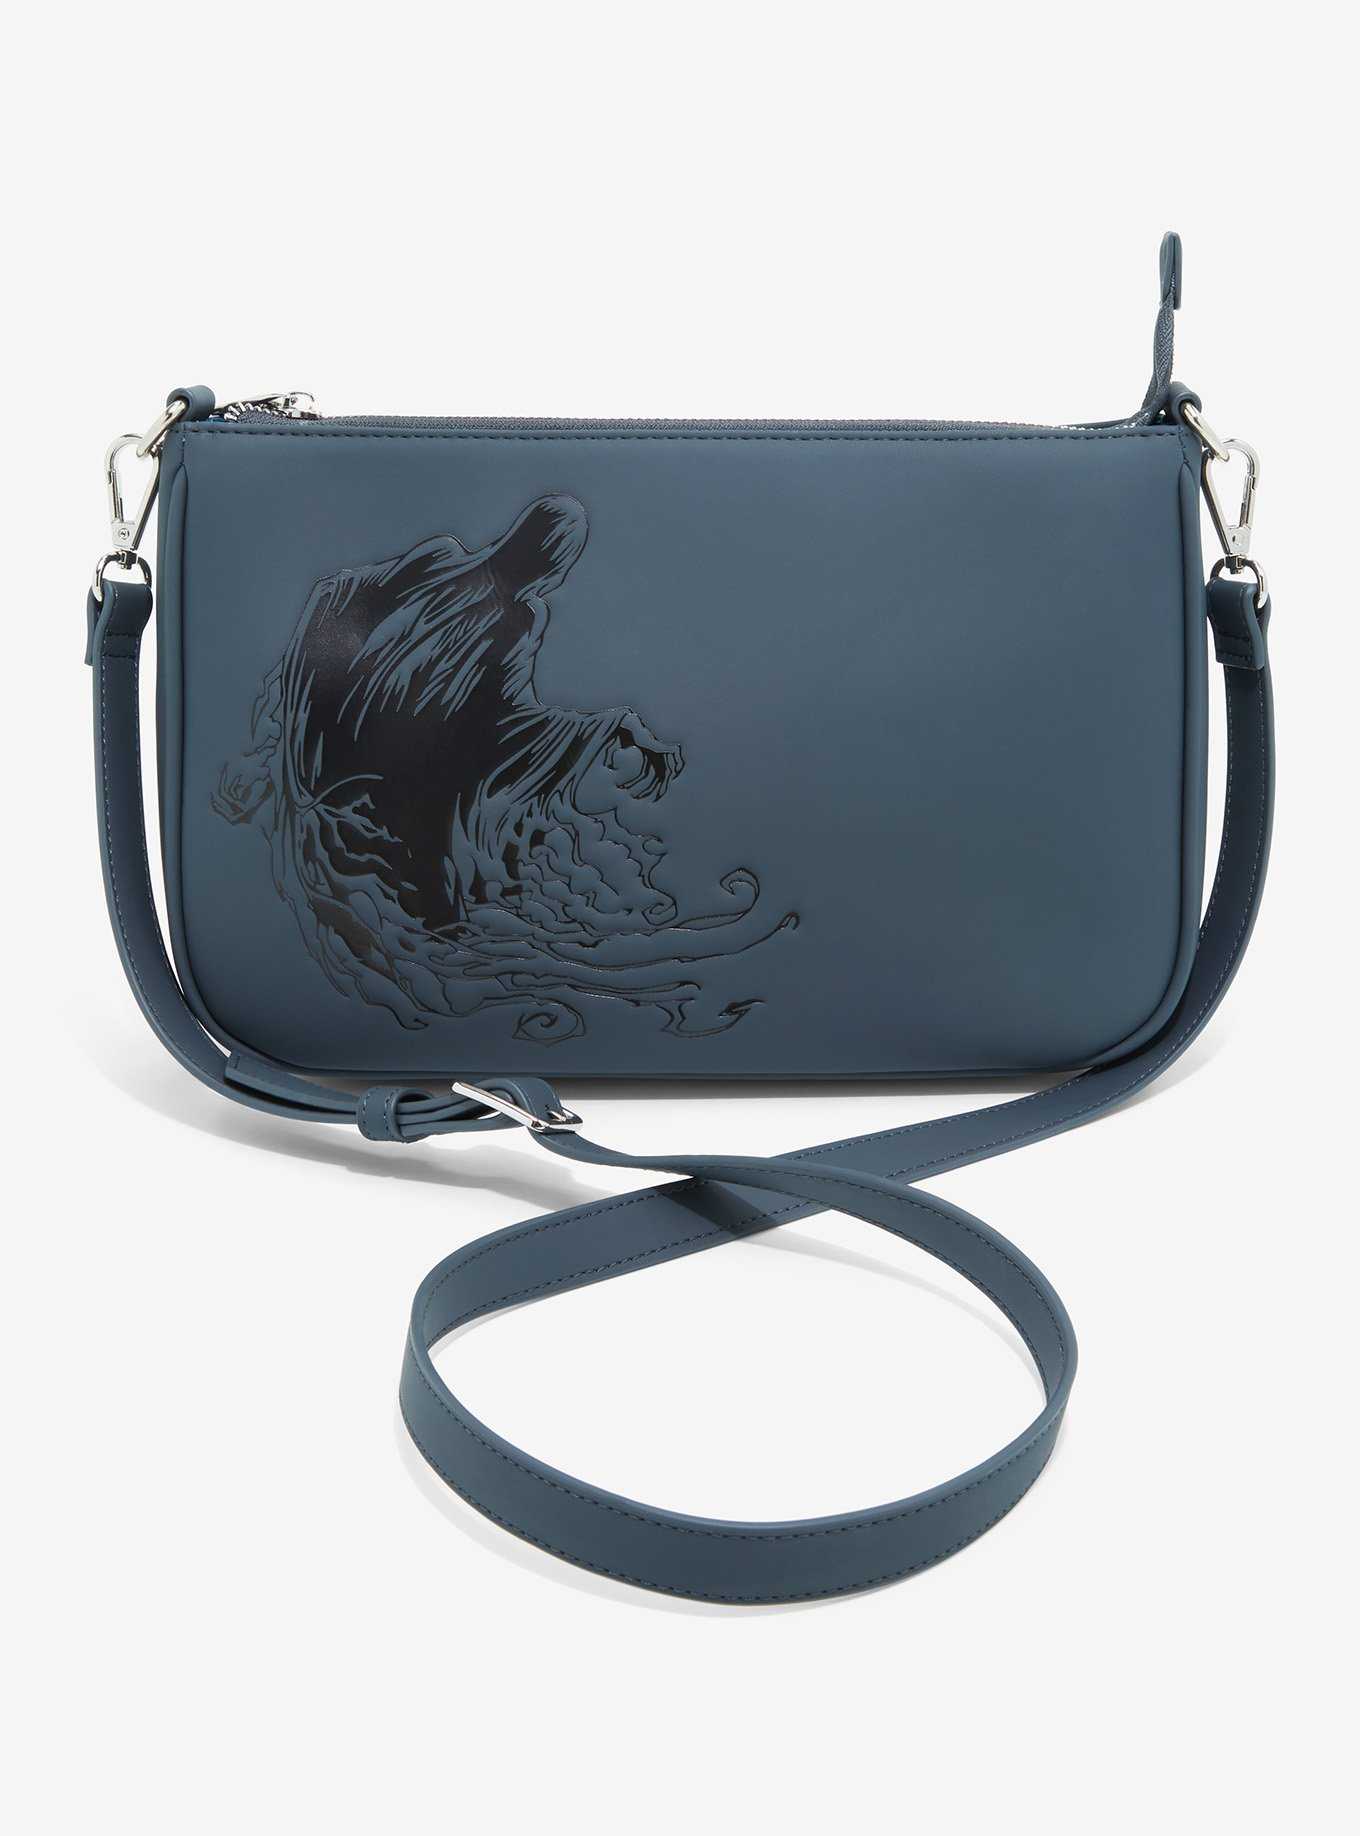 Danielle Nicole Harry Potter Horcrux Collection Rowena Ravenclaw Diadem  Crossbody Bag - BoxLunch Exclusive